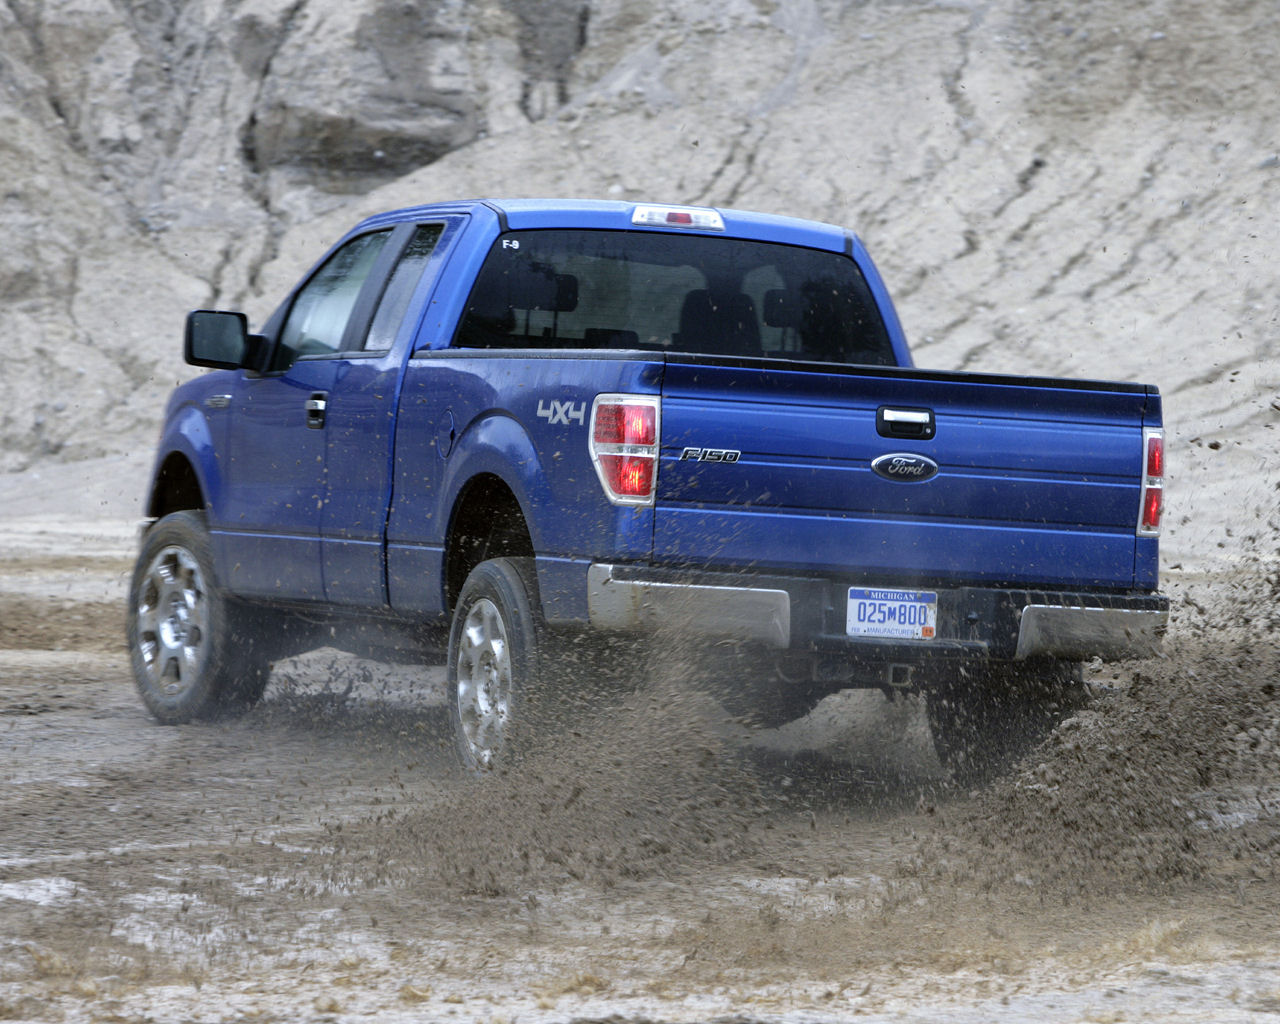 click on the Ford F150 wallpaper below and choose Set as Background